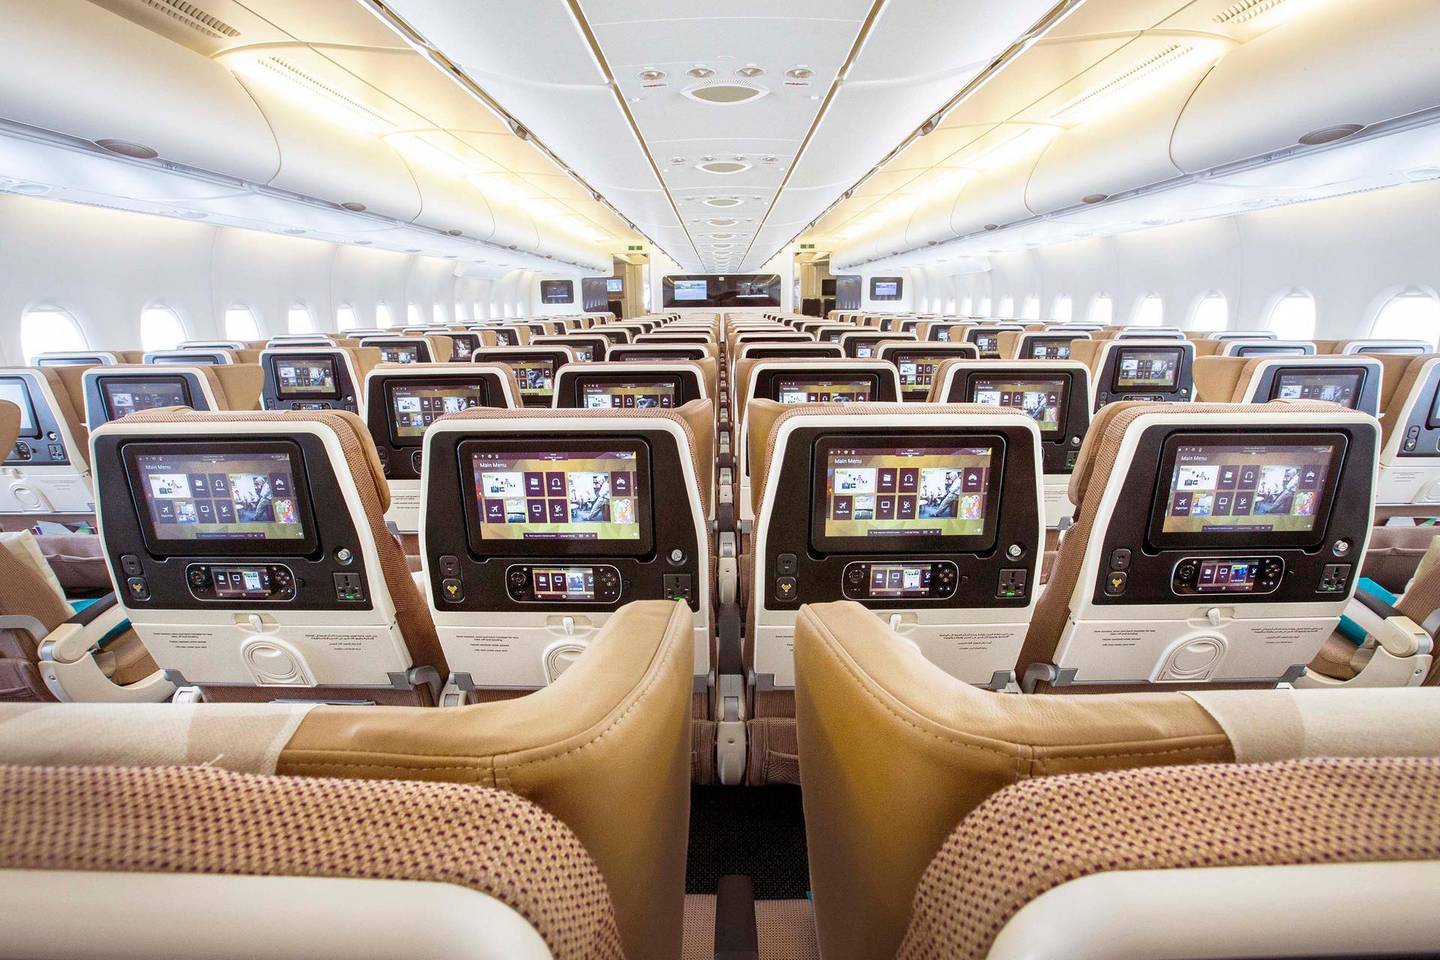 Etihad has replaced 10,000 seat covers 